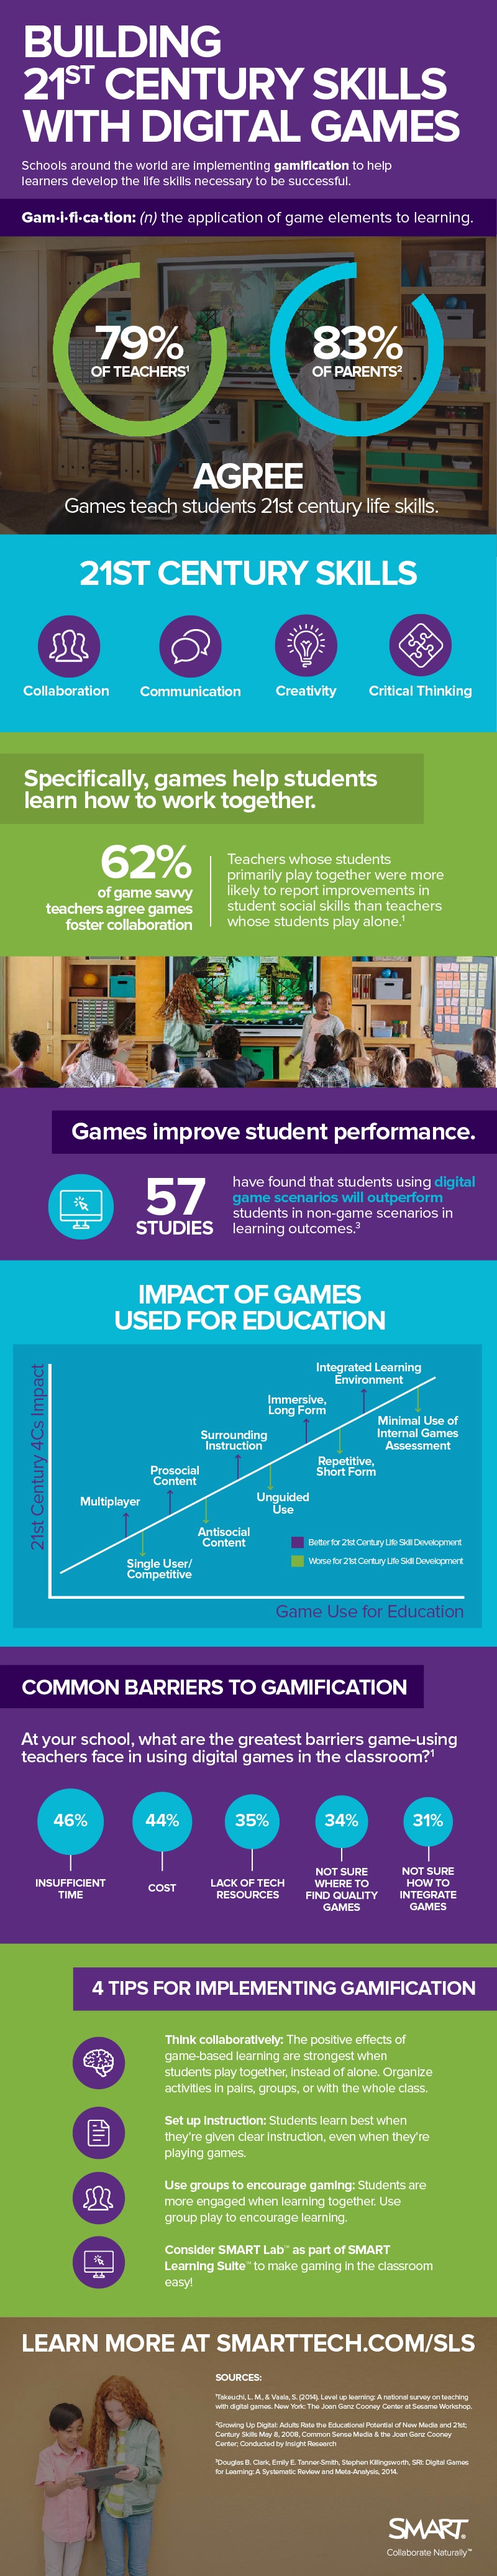 Building 21st Century Skills with Digital Games Infographic